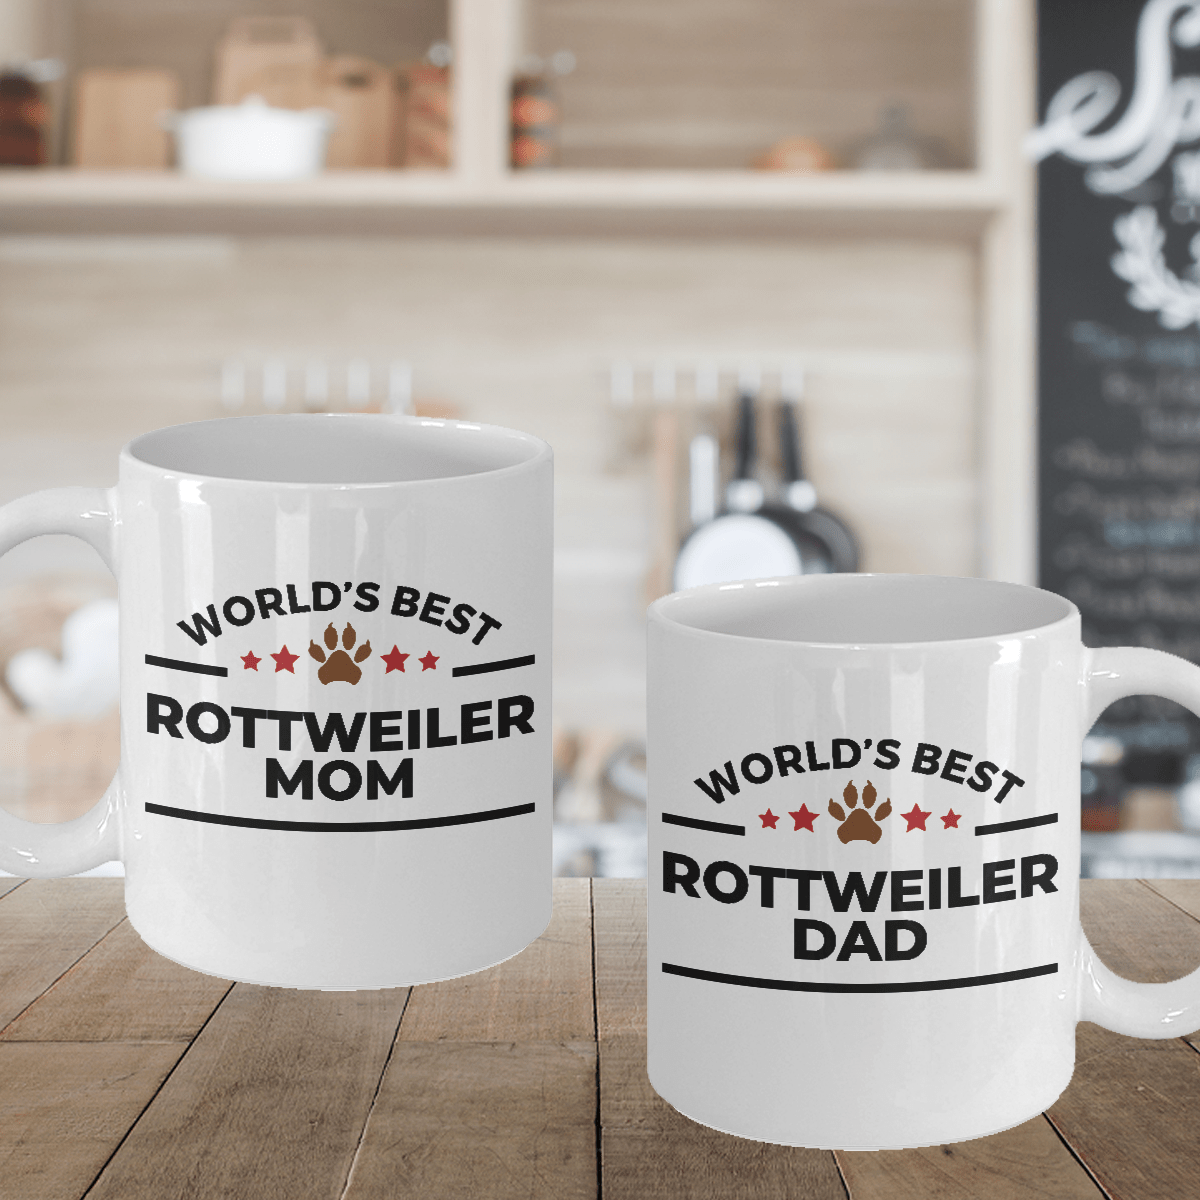 Rottweiler Dad and Mom Ceramic Mugs - Set of 2 - His and Hers